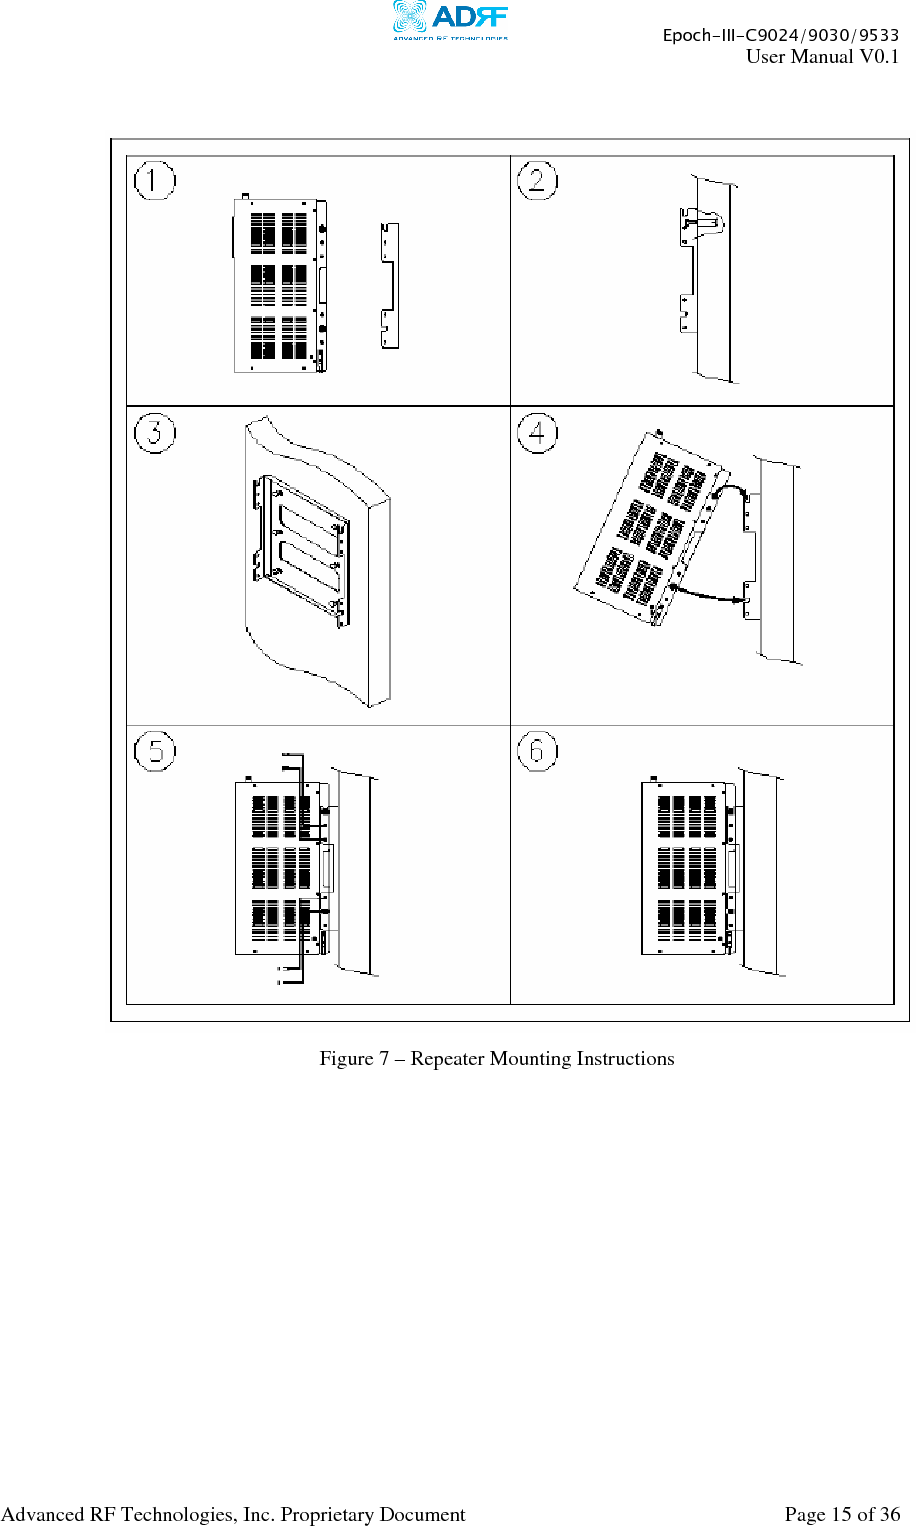     Epoch-III-C9024/9030/9533 User Manual V0.1  Advanced RF Technologies, Inc. Proprietary Document  Page 15 of 36         Figure 7 – Repeater Mounting Instructions 